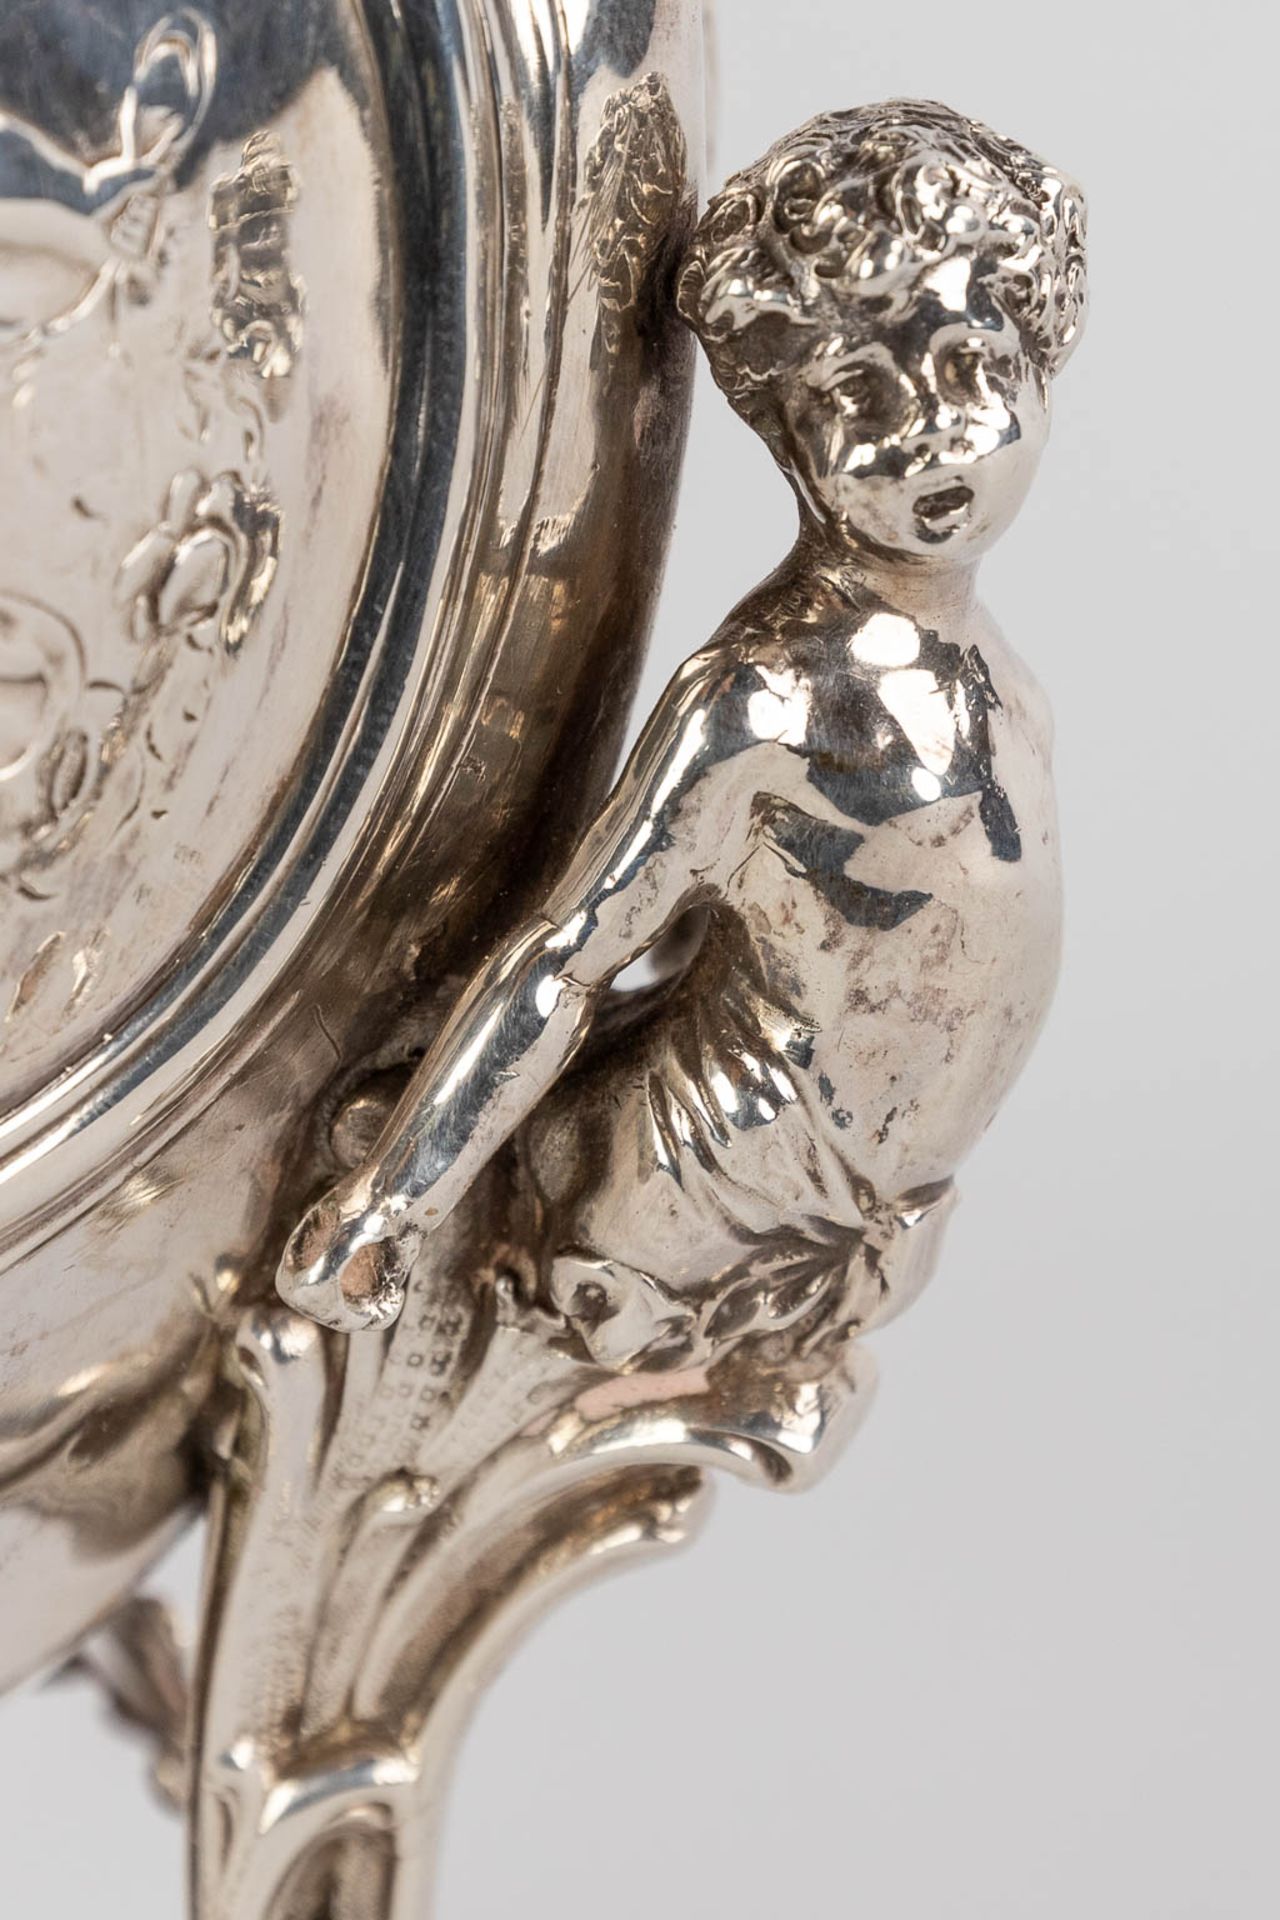 A fine vase, silver in Louis XV style, mounted with 3 putto. 427g. 1906. (D:11 x W:11 x H:20 cm) - Image 11 of 12